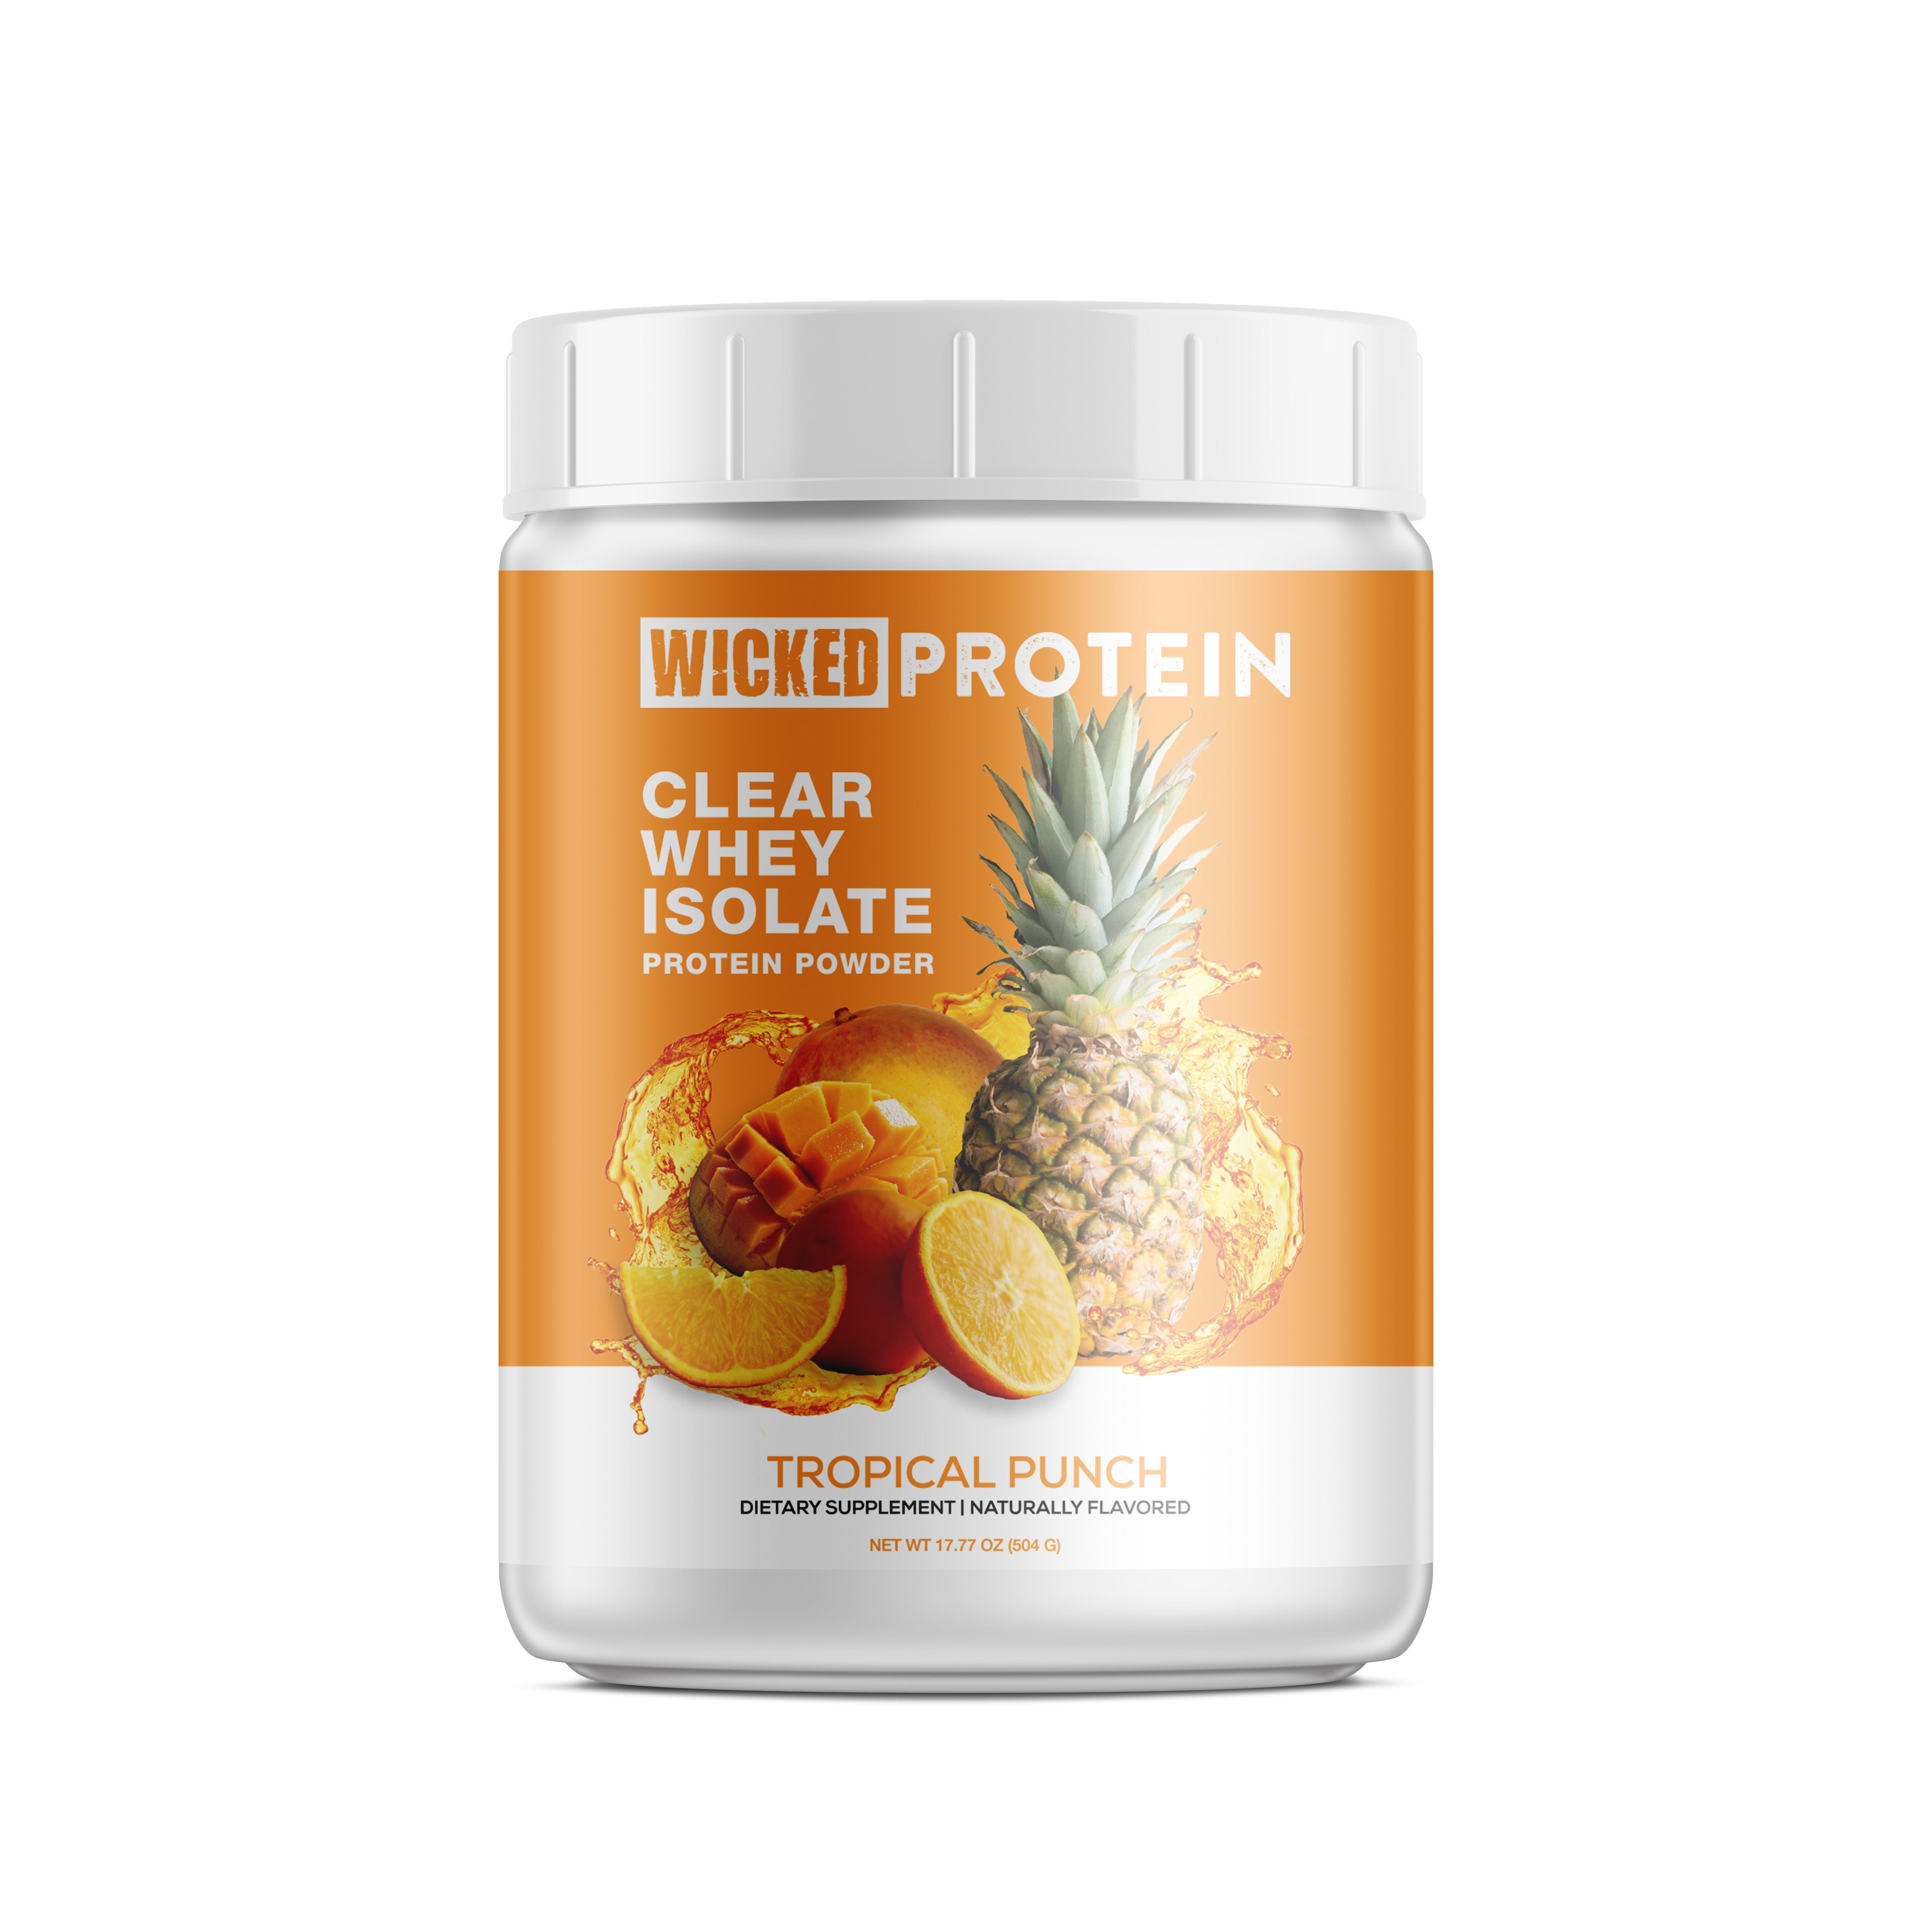 WICKED Tropical Punch Clear Whey Isolate Protein Powder (Pre Order) –  WICKED Protein